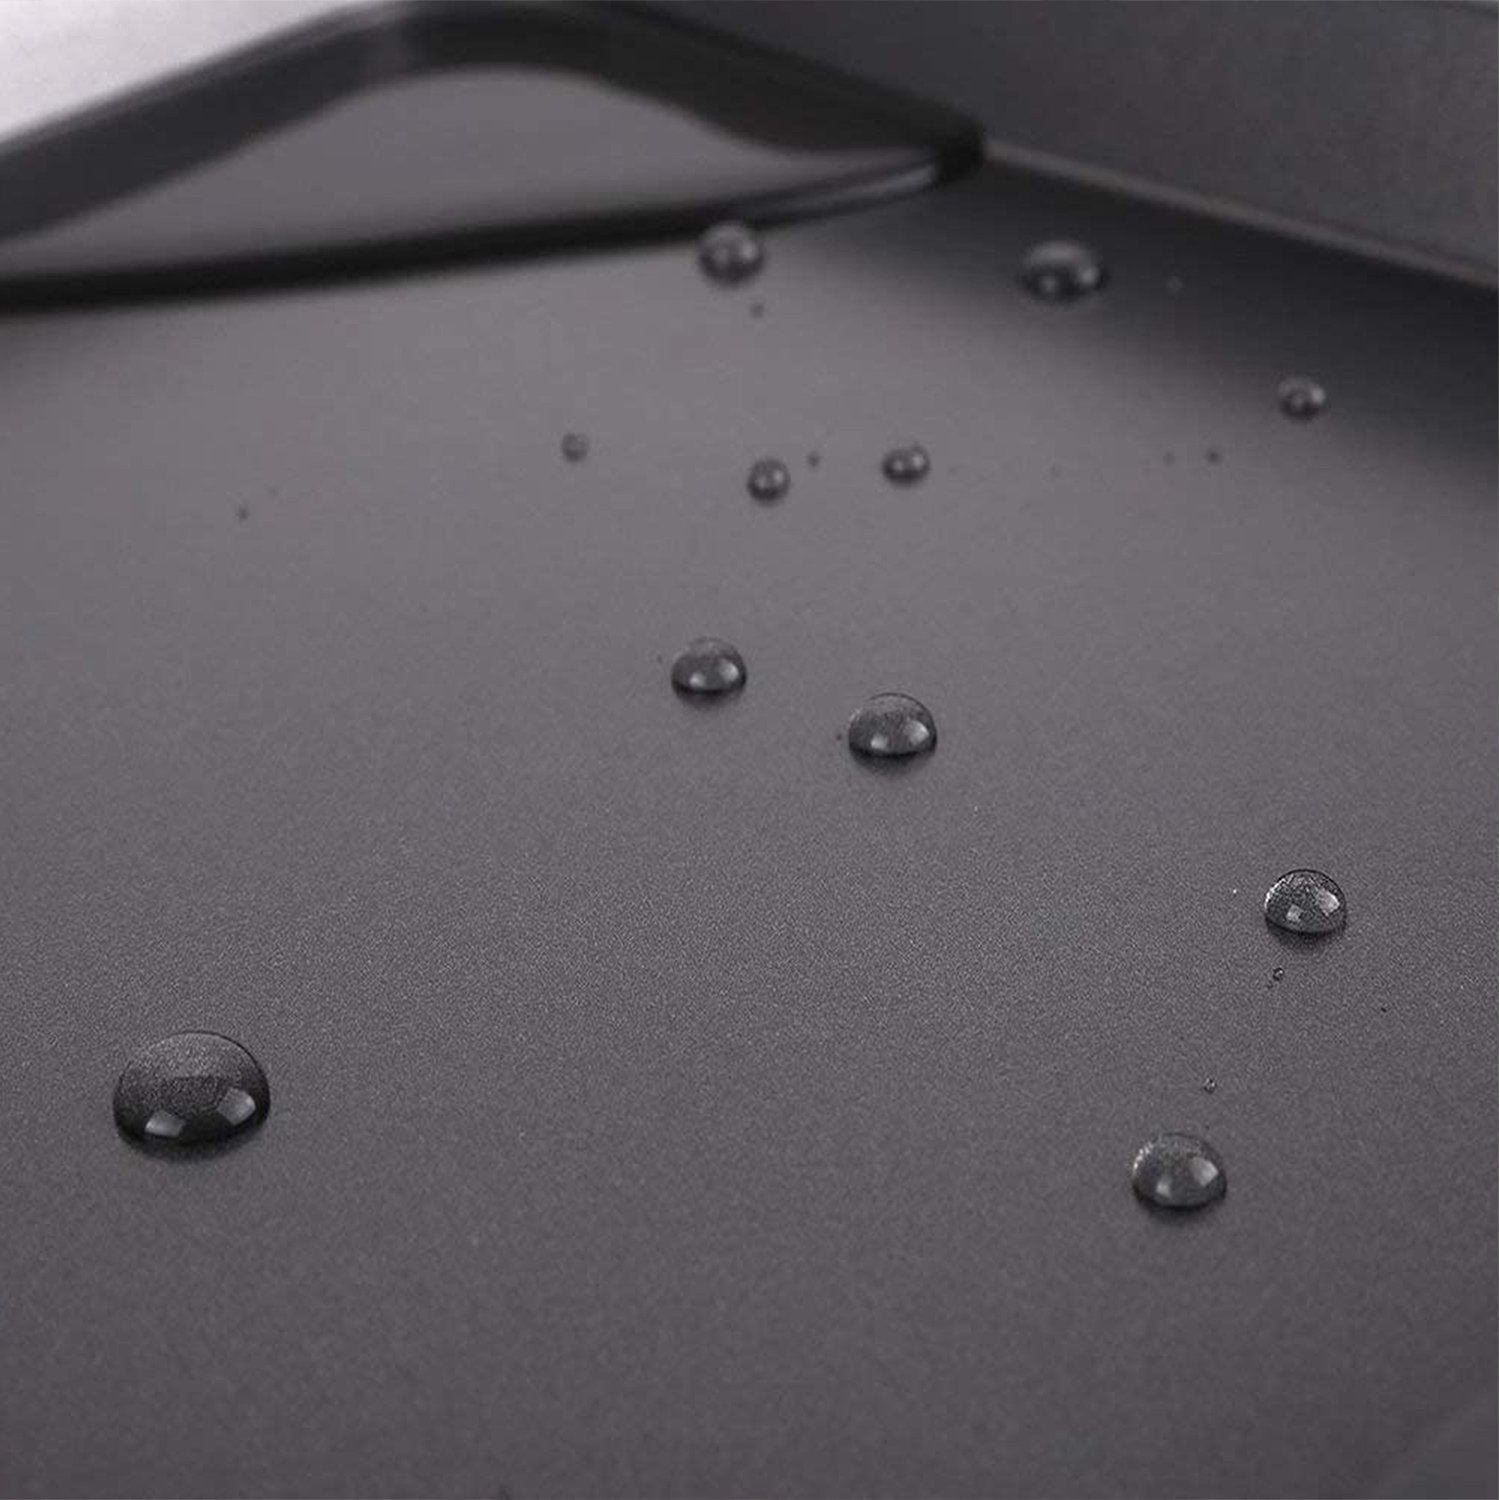 7035 Square Shape Carbon Steel Non-stick Baking Tray (15 inch)